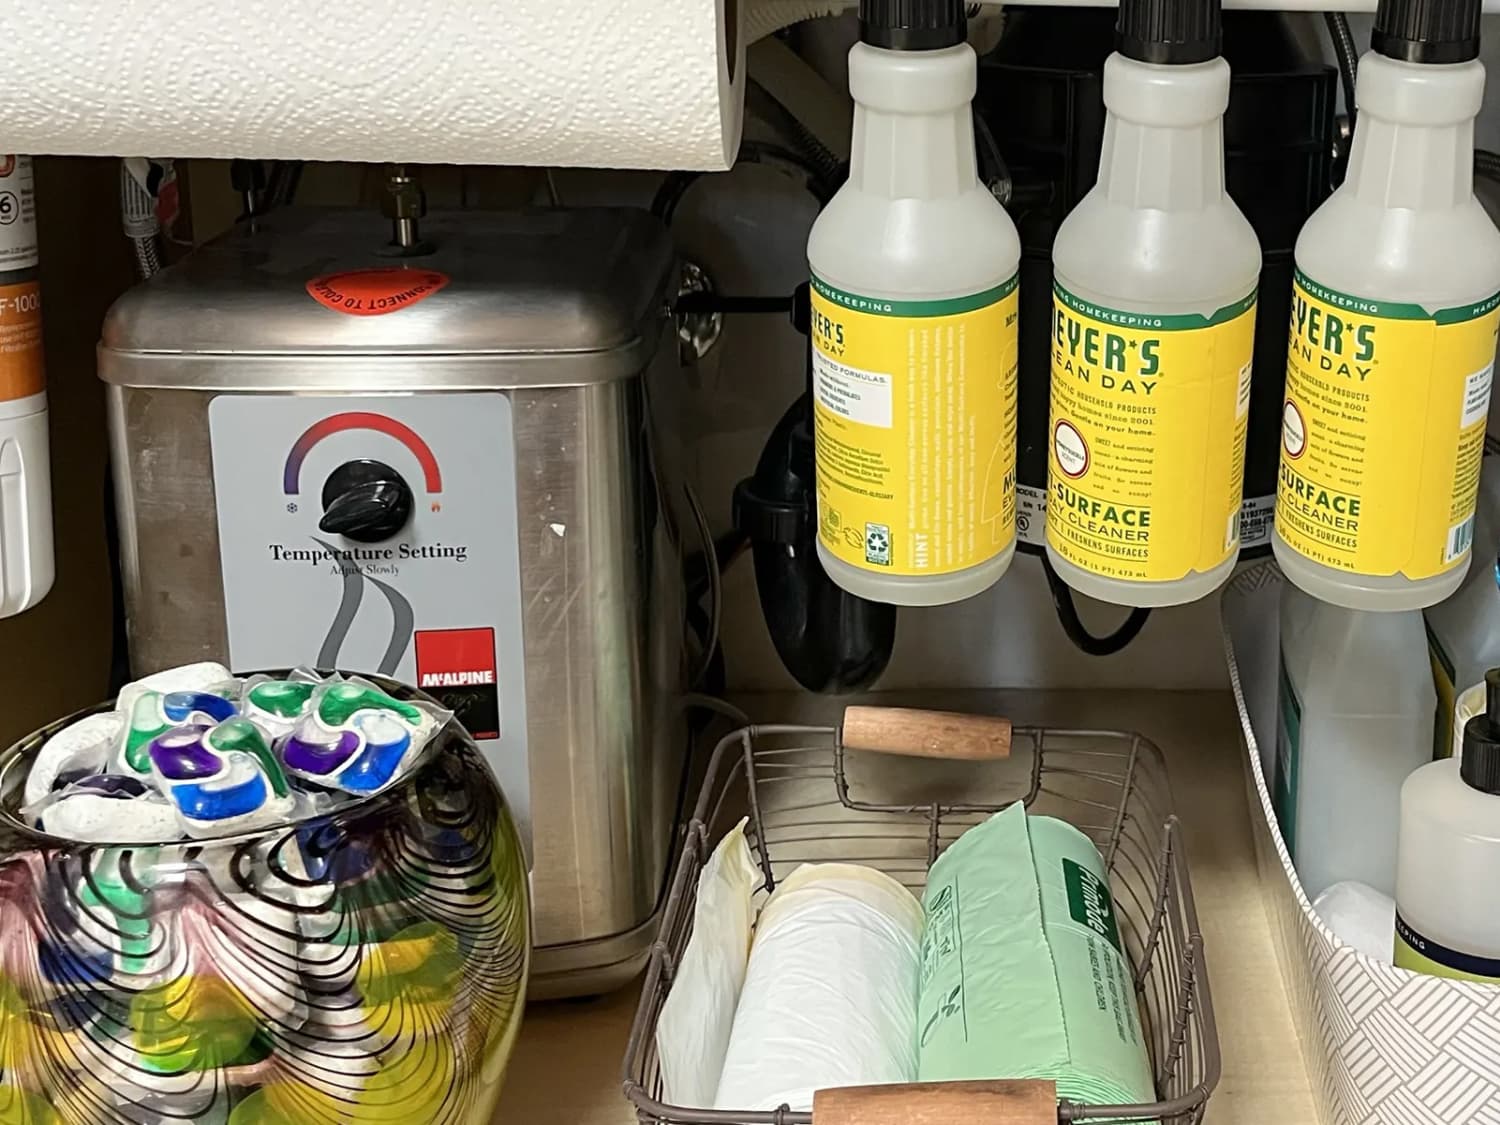 Use a tension rod to increase storage space under the sink - CNET